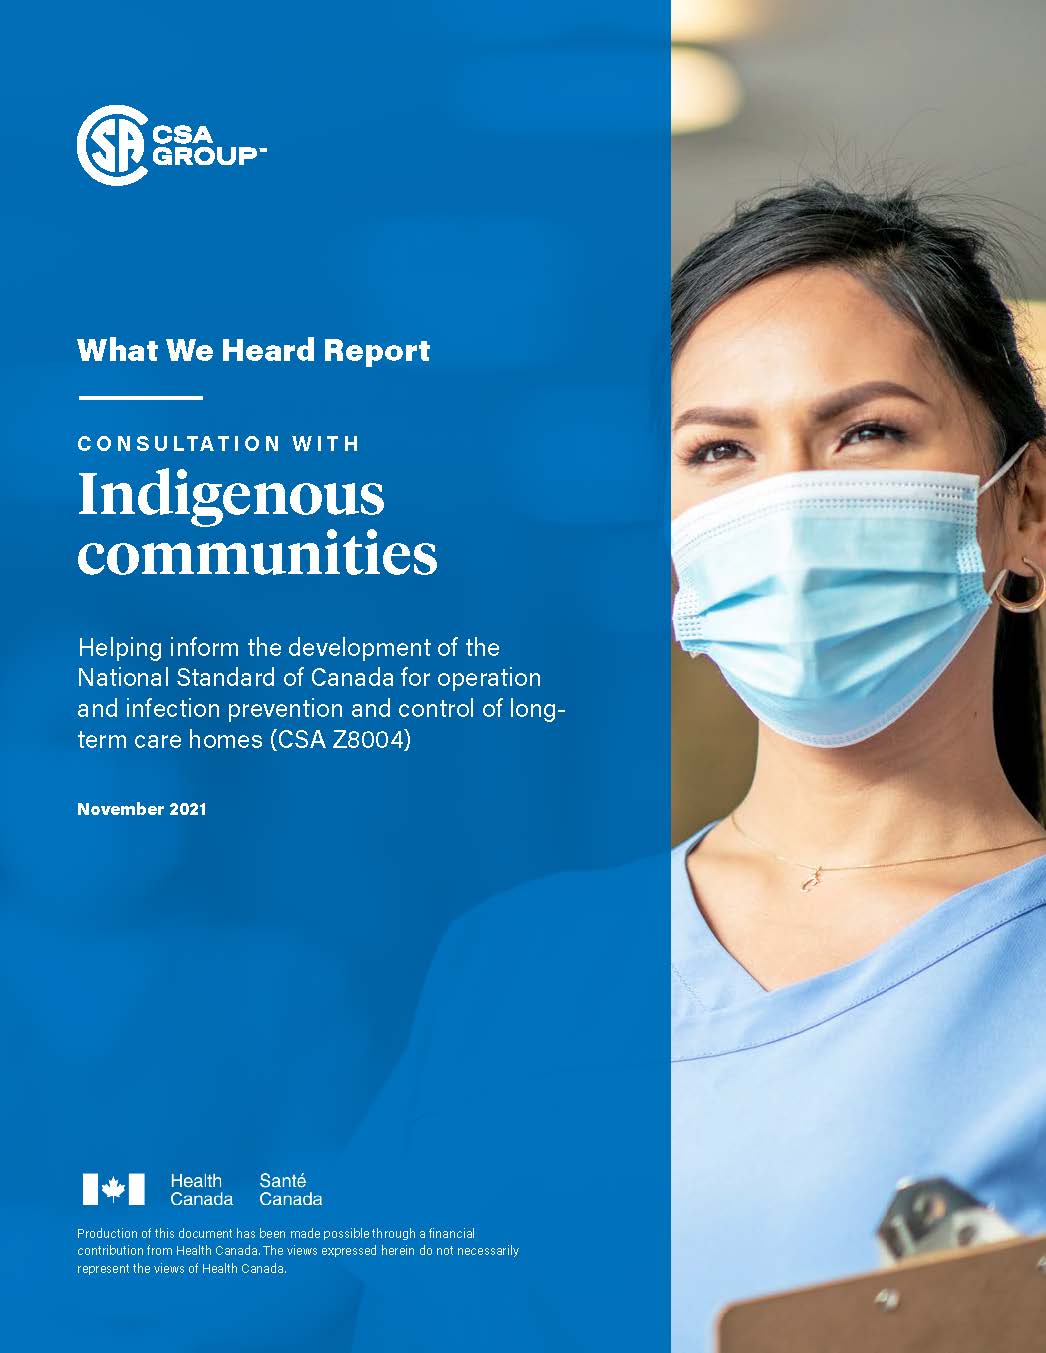 Featured Image. Title page of the What We Heard Report from the consultation session with Indigenous communities on a new CSA Standard for long-term care homes